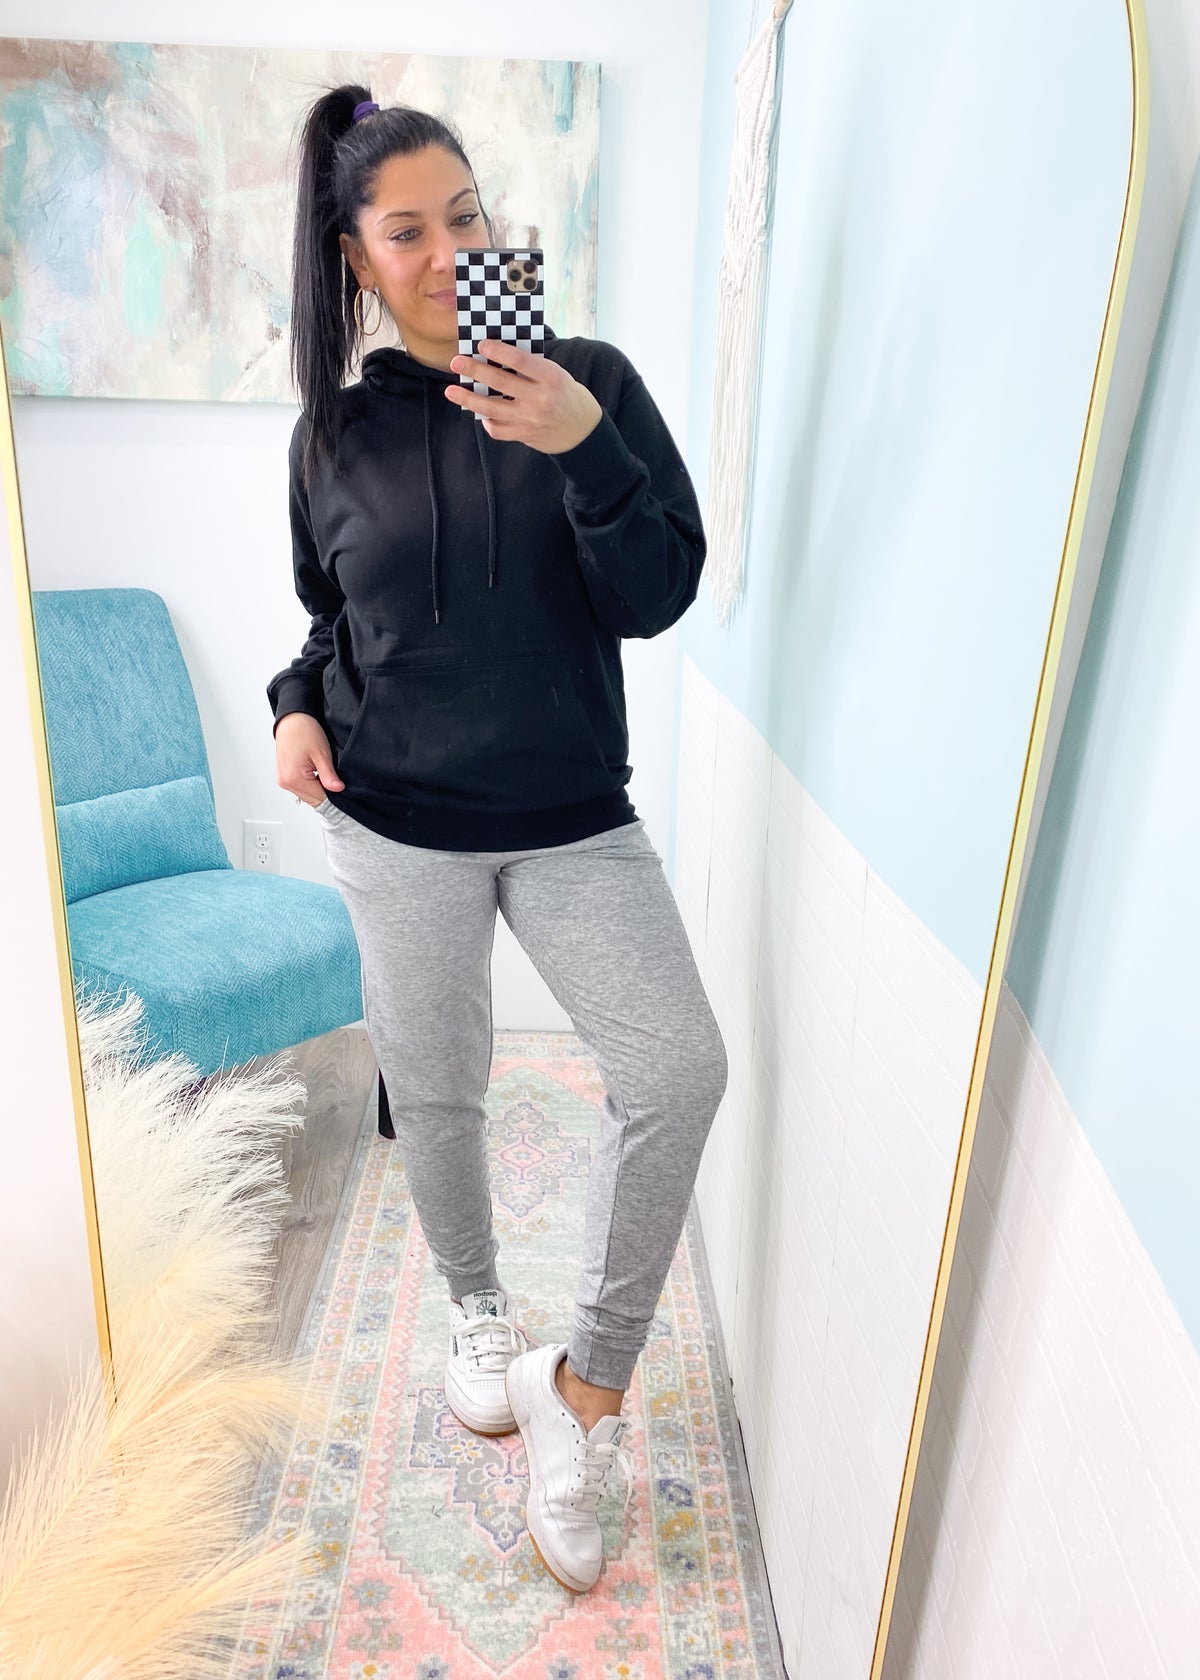 'Fiona' Heather Gray Boyfriend Fit French Terry Joggers-The perfect athleisure joggers with a relaxed & slouchy fit for everyday! Pair these with all your favorite tees, sweatshirts, denim jackets. -Cali Moon Boutique, Plainville Connecticut